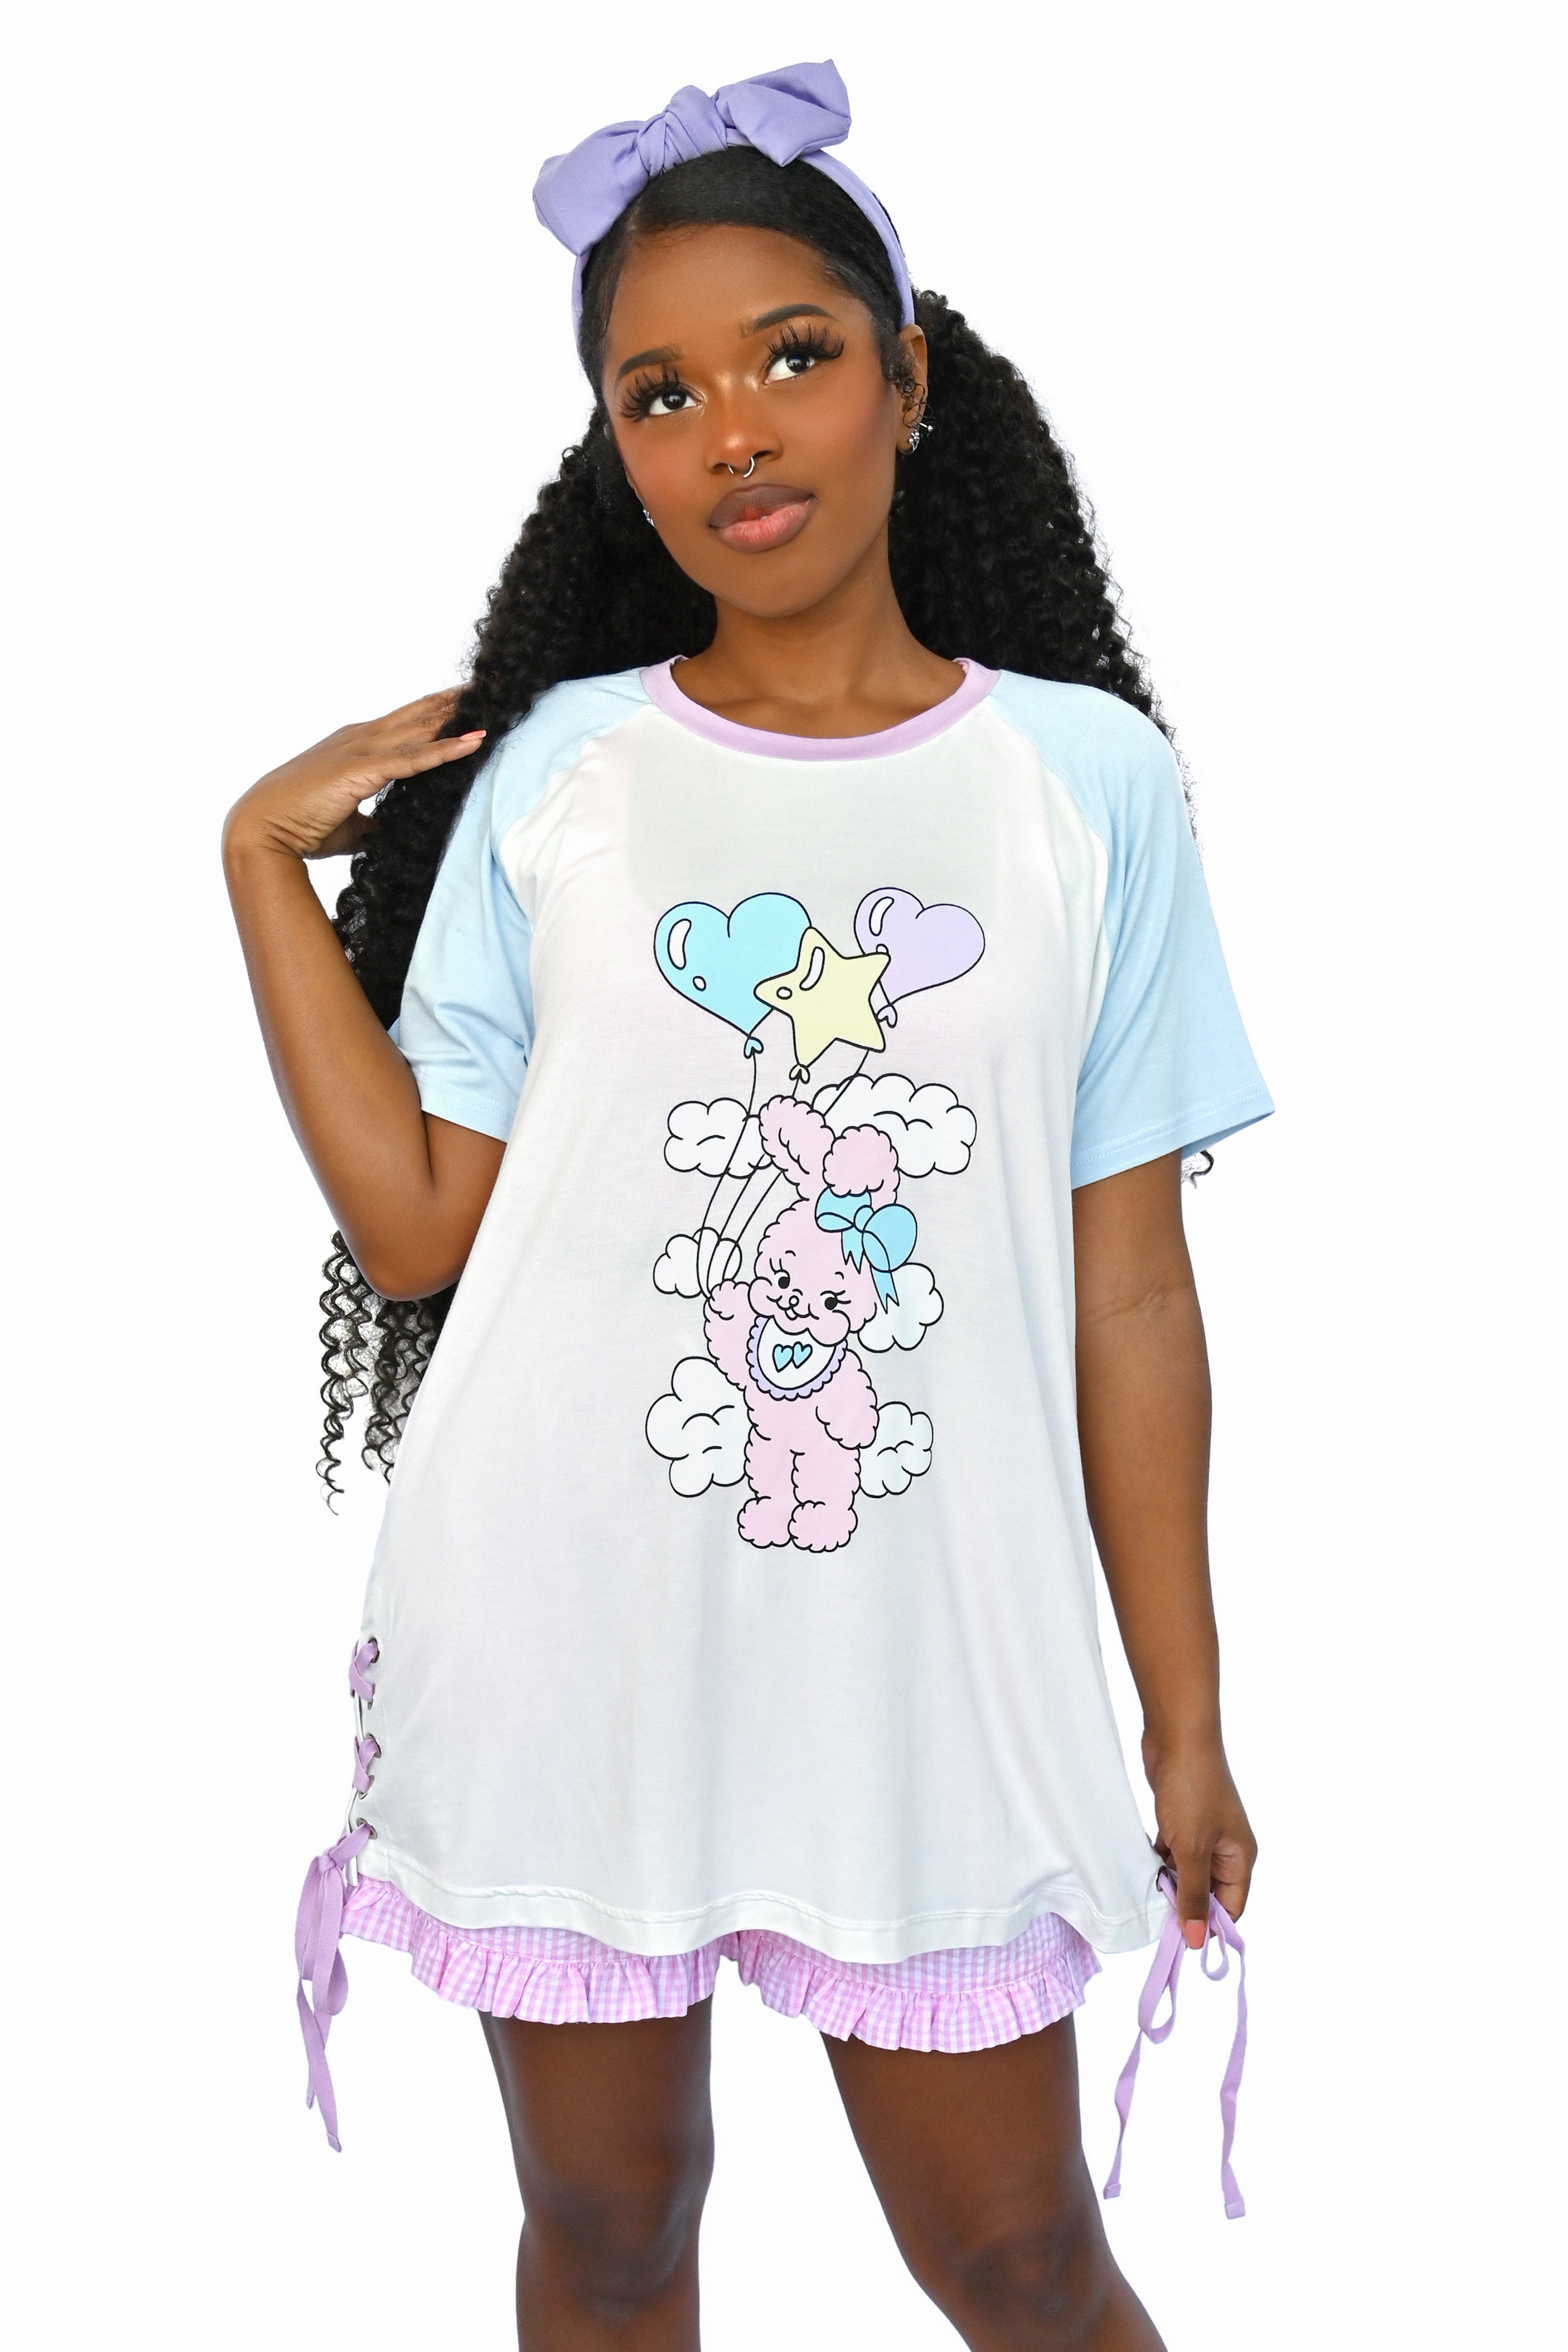 Care free bunny floating through the clouds on an array of cute balloons. Colorblock sleeves and collar and the cutest grommet lace up side detail. But that's not all, turn around and see that Cry Bear has your back!